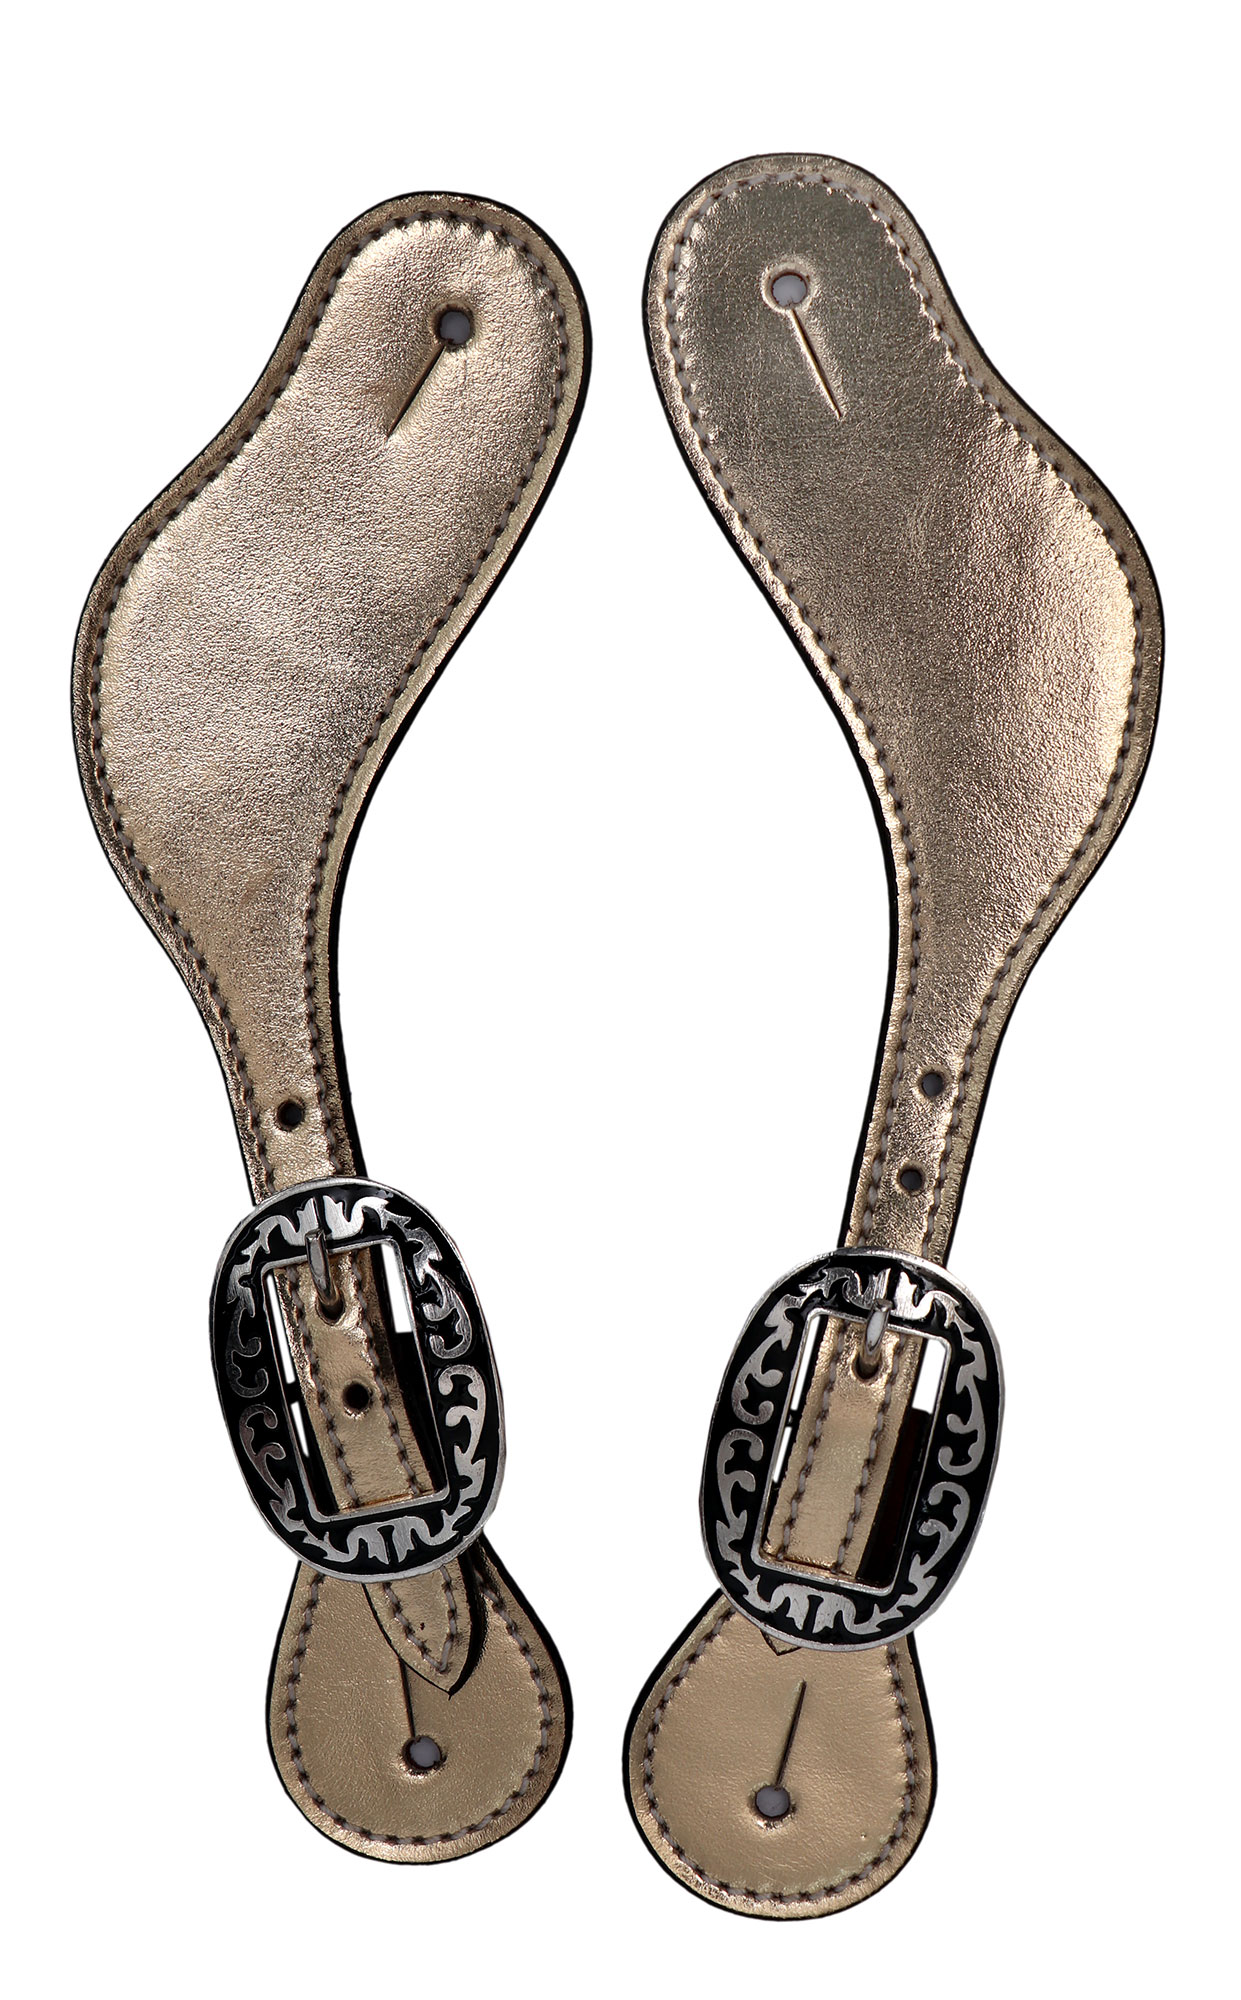 Bridle Leather  Metallic Spur Straps | Adjustable Boot Straps | Two Ply  Spur Straps for  Western Women Men Horse Riding.